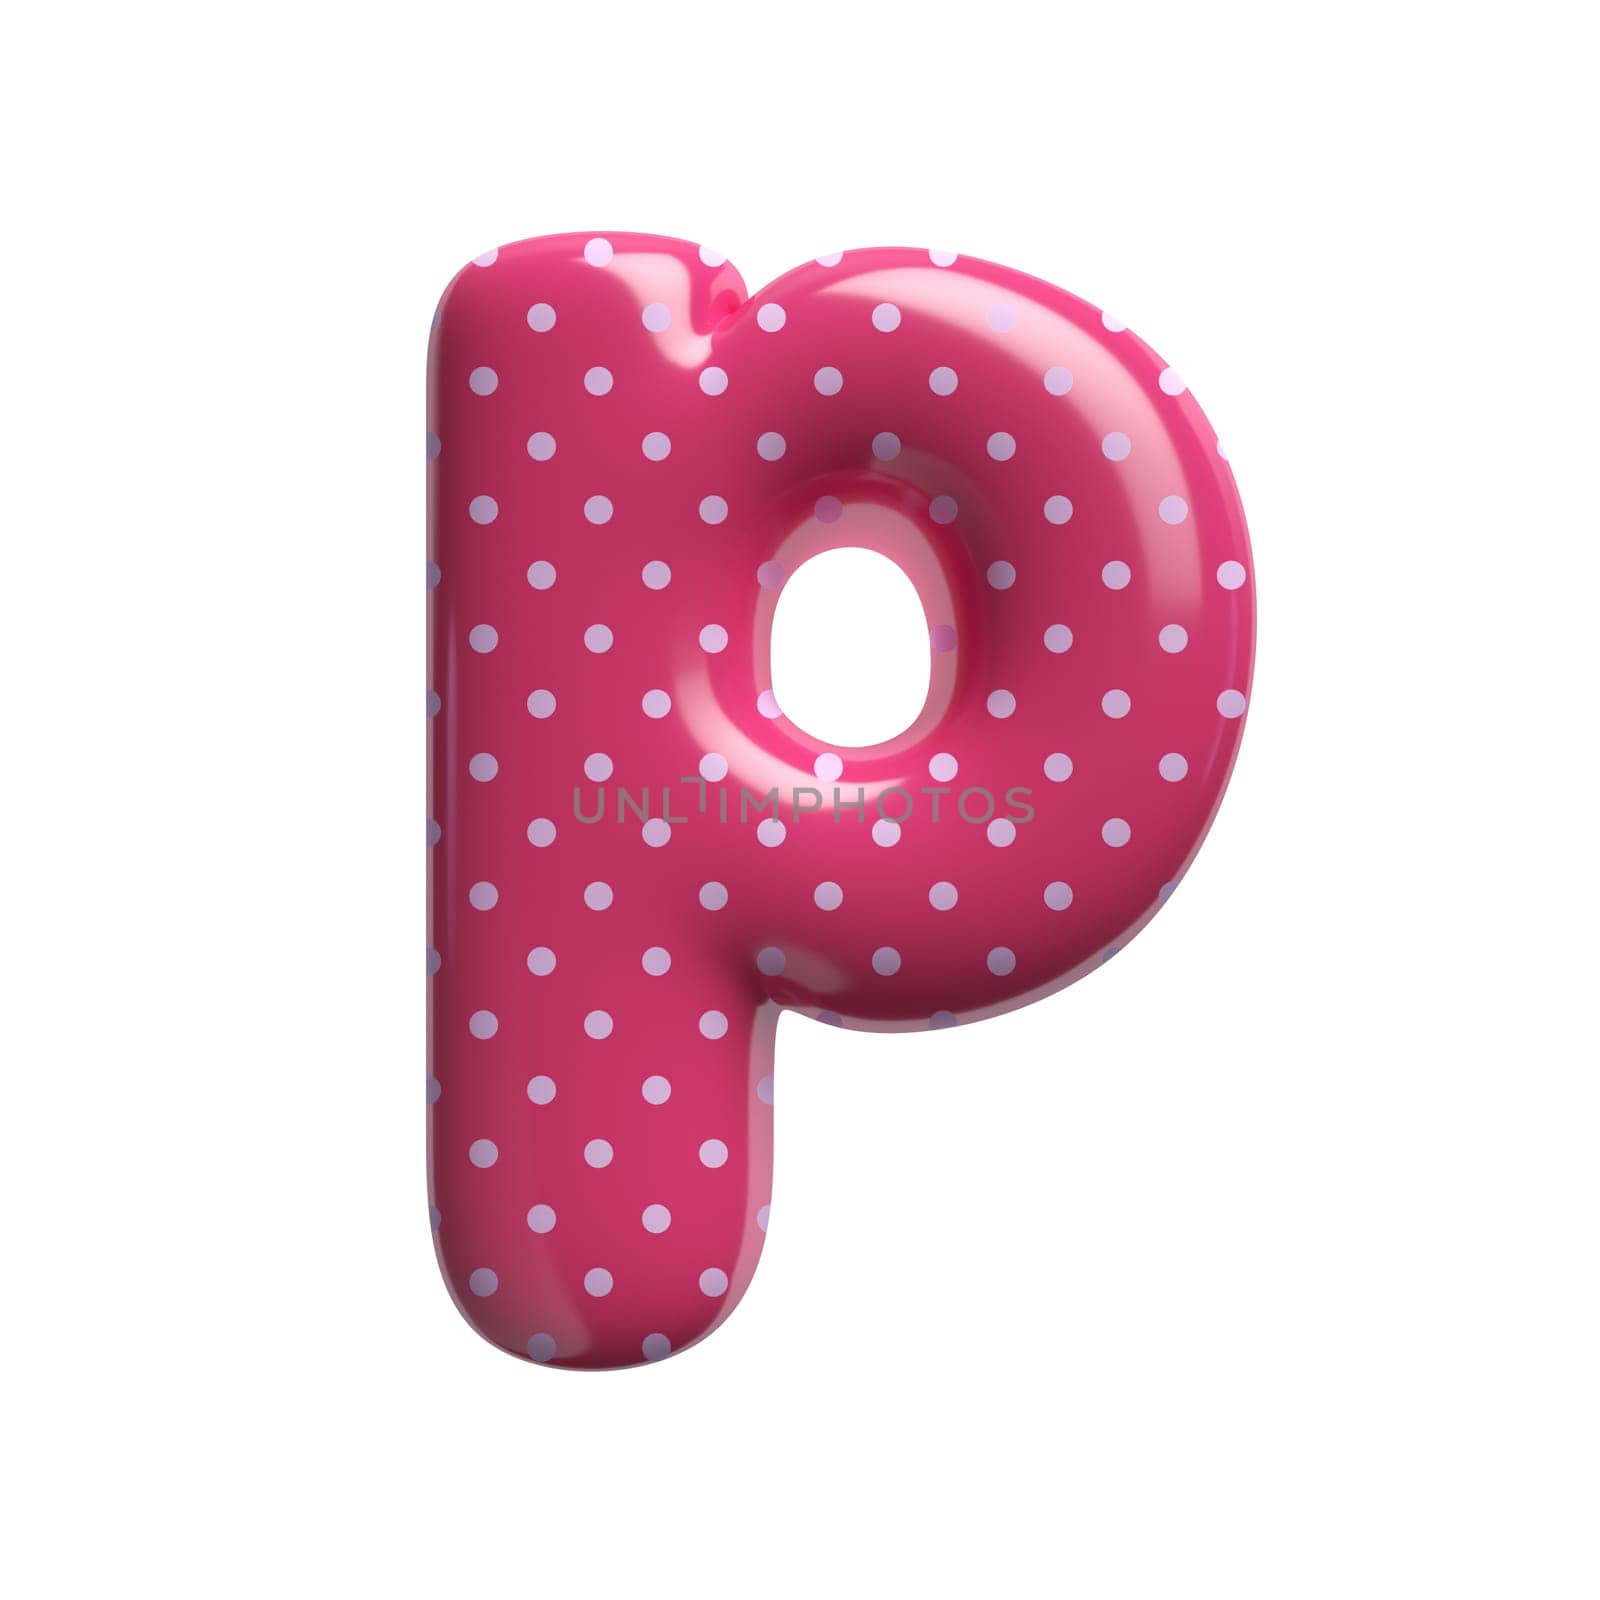 Polka dot letter P - Small 3d pink retro font isolated on white background. This alphabet is perfect for creative illustrations related but not limited to Fashion, retro design, decoration...